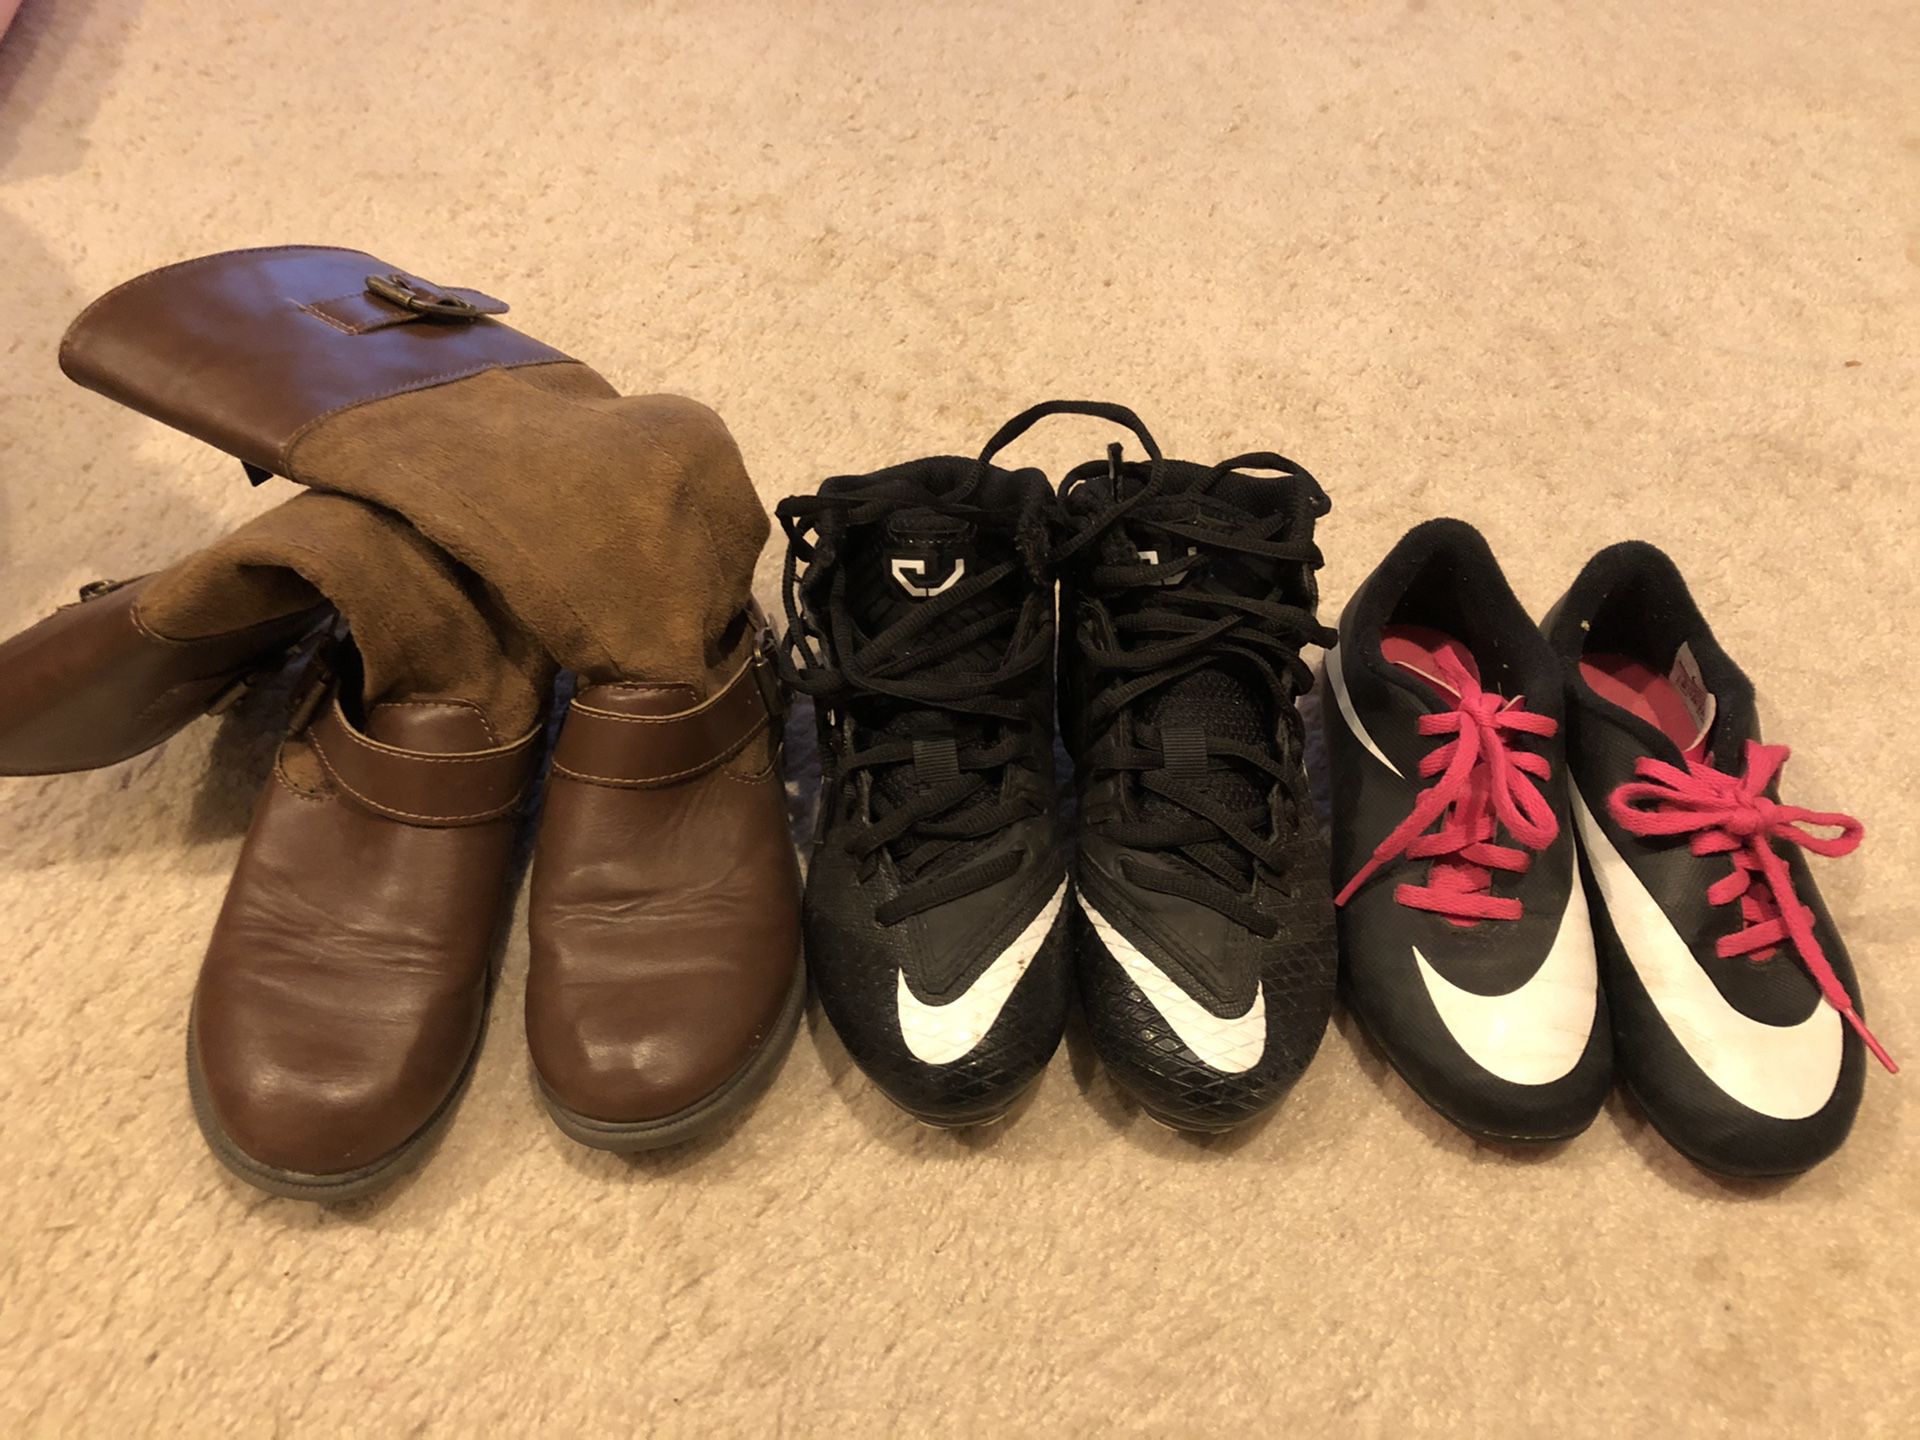 Girls boots and soccer shoes